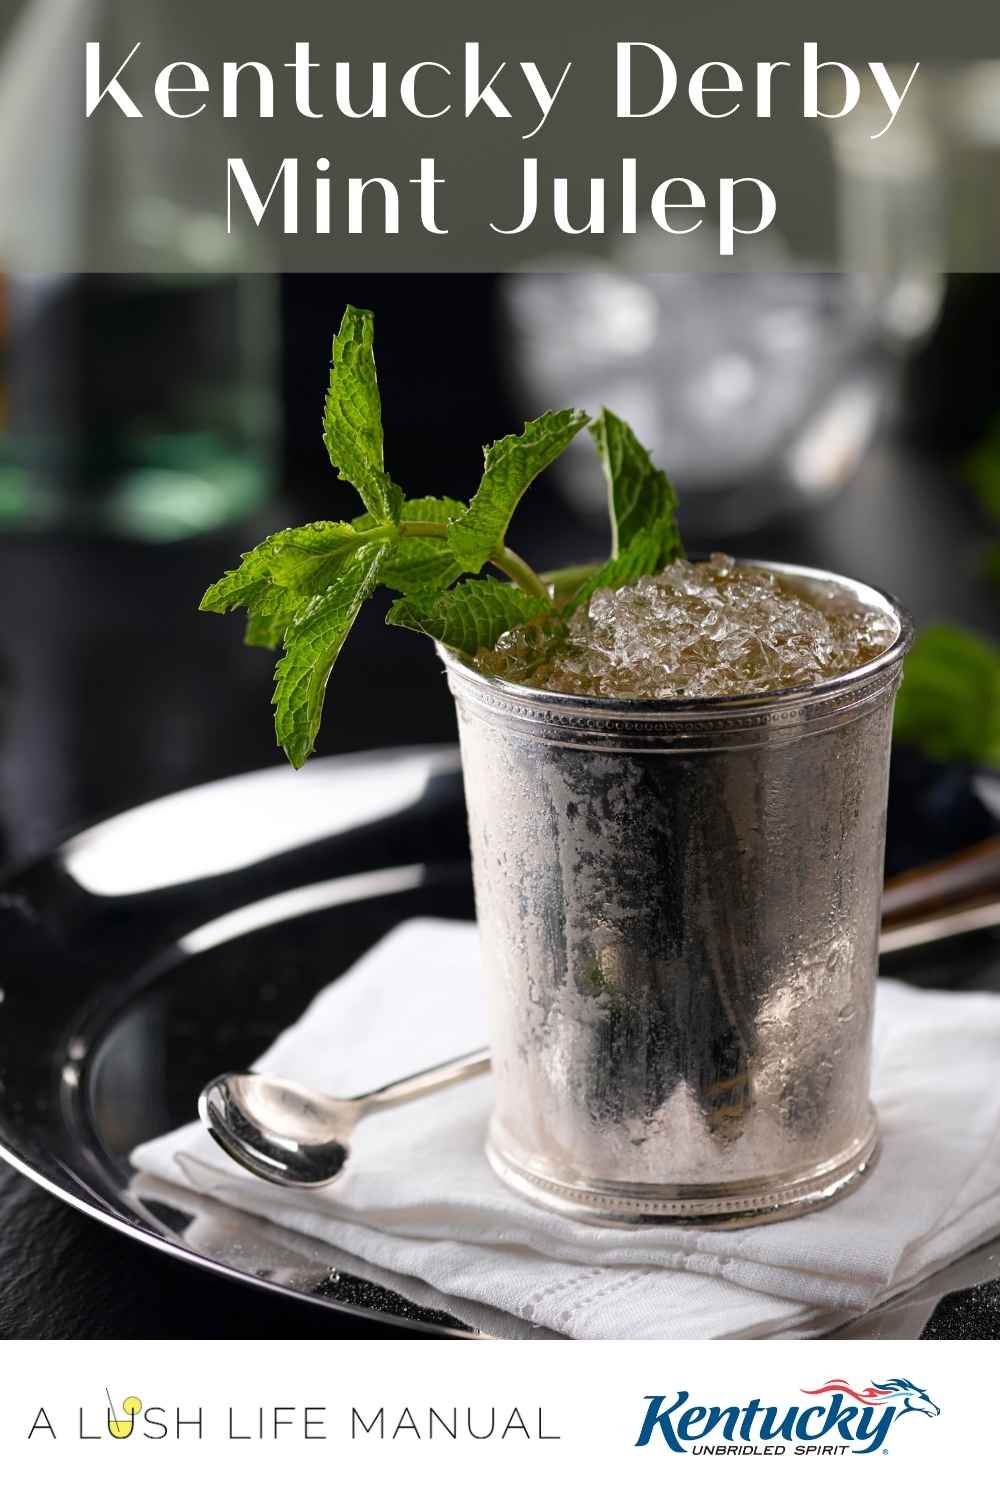 How To Make The Kentucky Derby Mint Julep